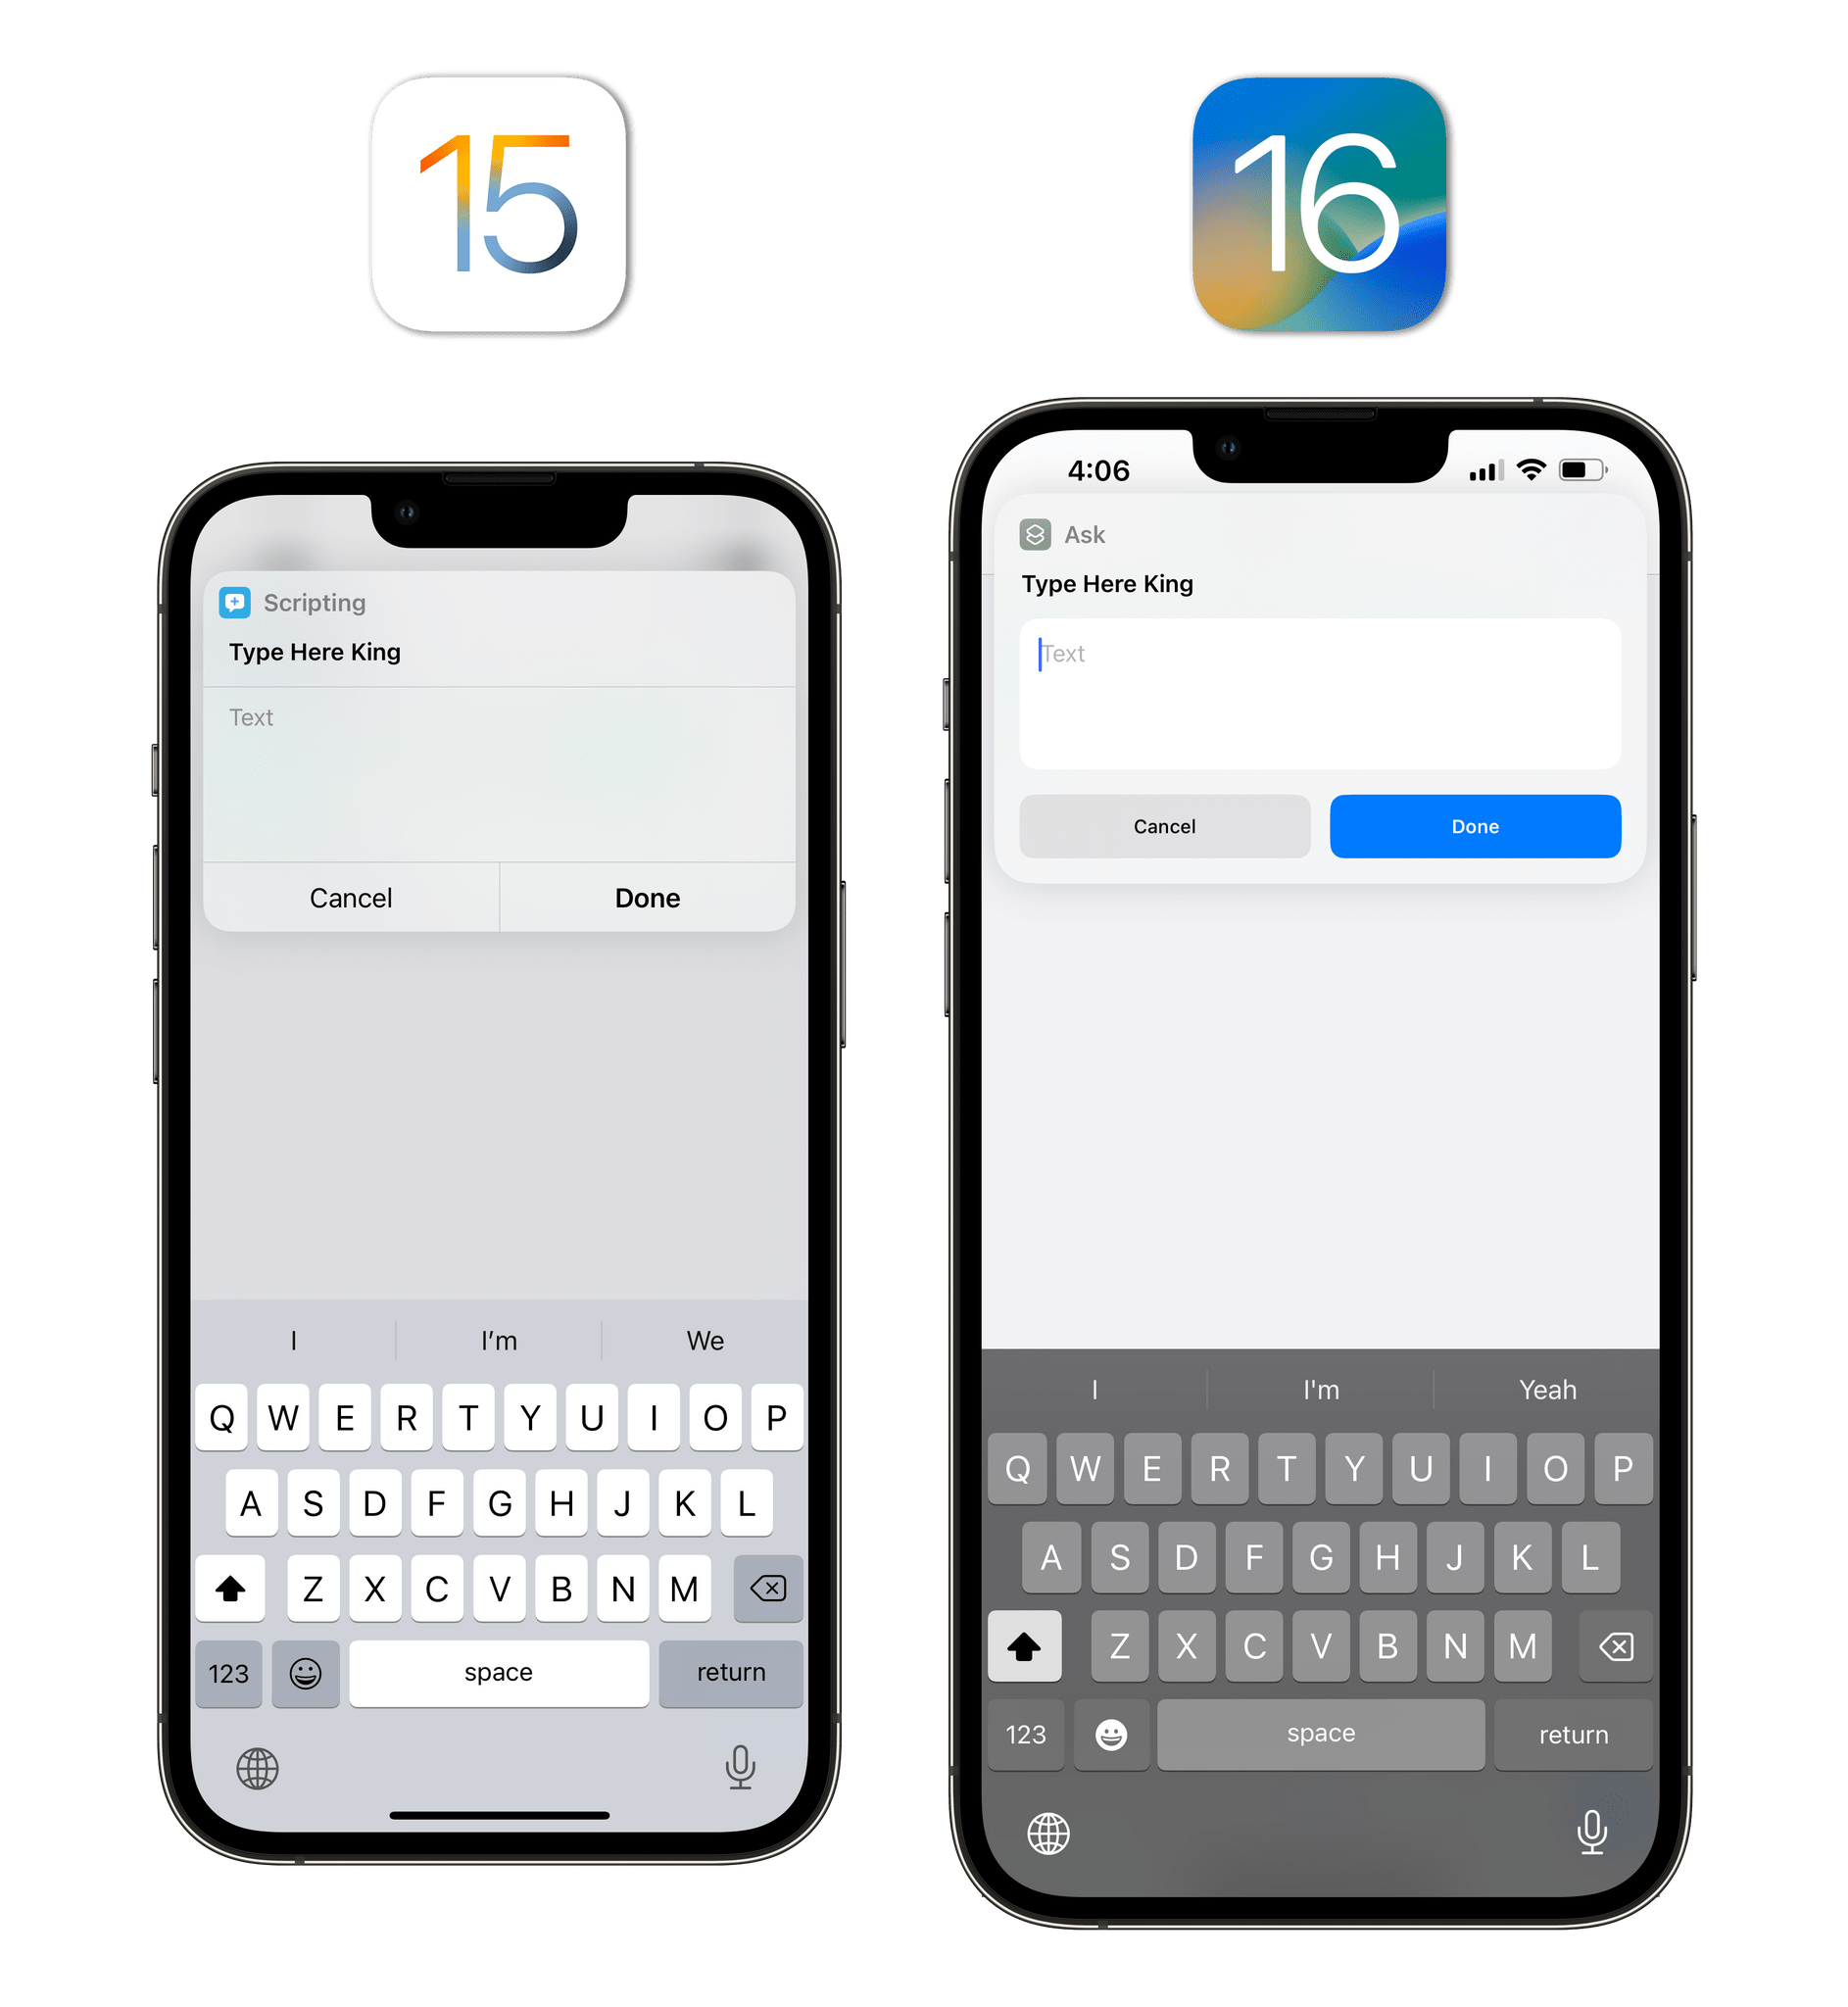 The new look for Shortcuts prompts in iOS 16. They're also faster and no longer block interactions with apps.